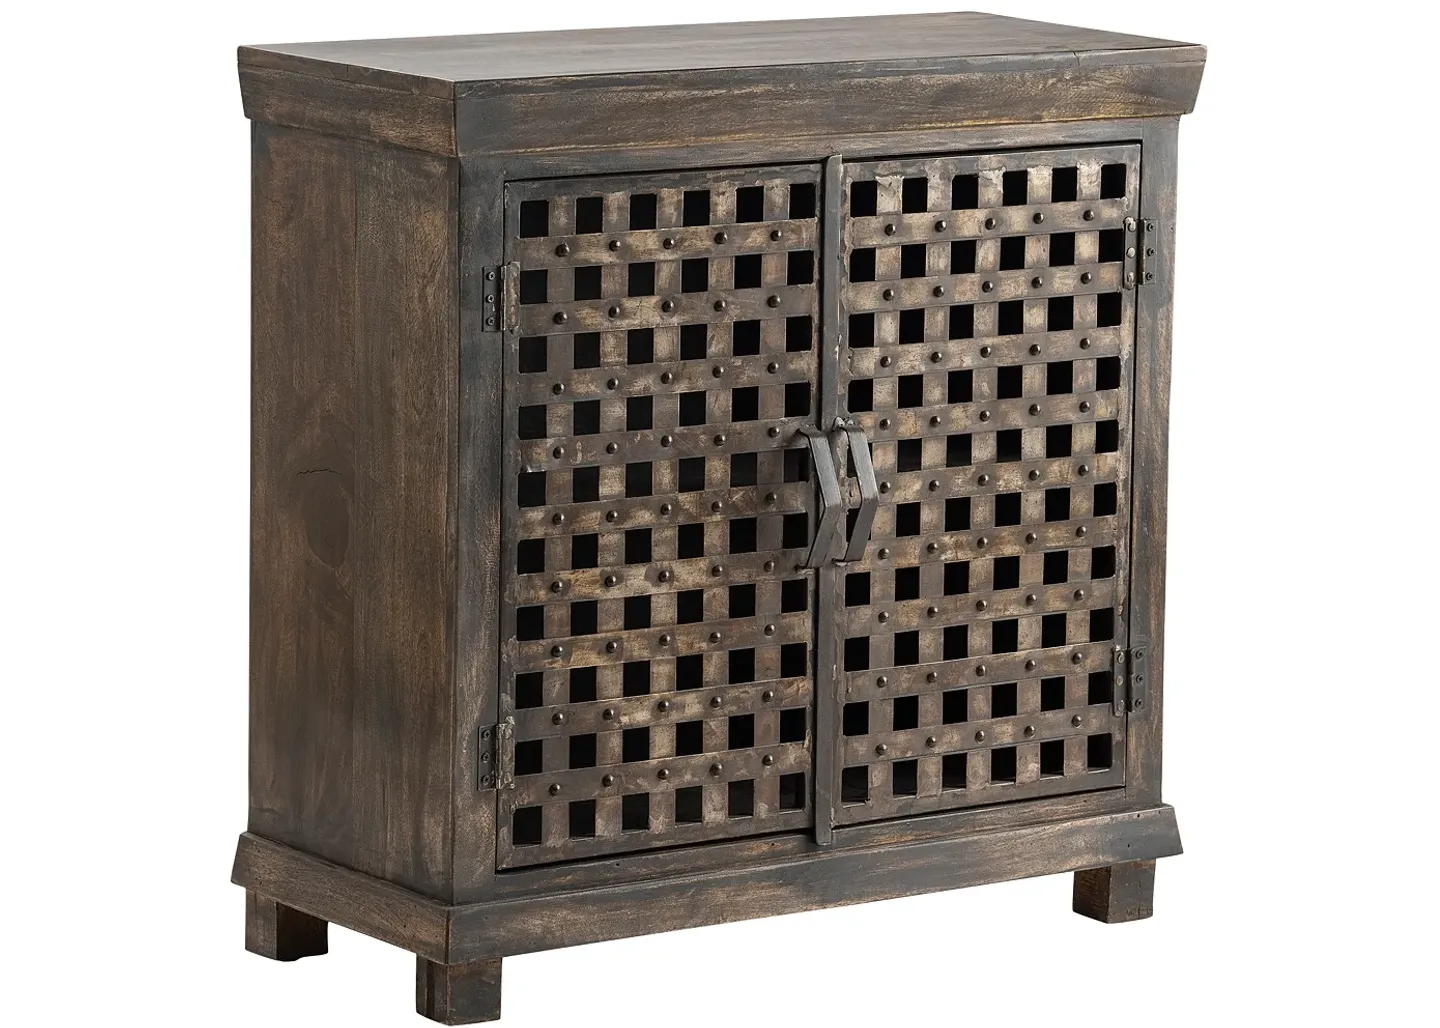 Crestview Collection Bengal Manor 36" Wide Mango Wood and Iron Lattice Cabinet